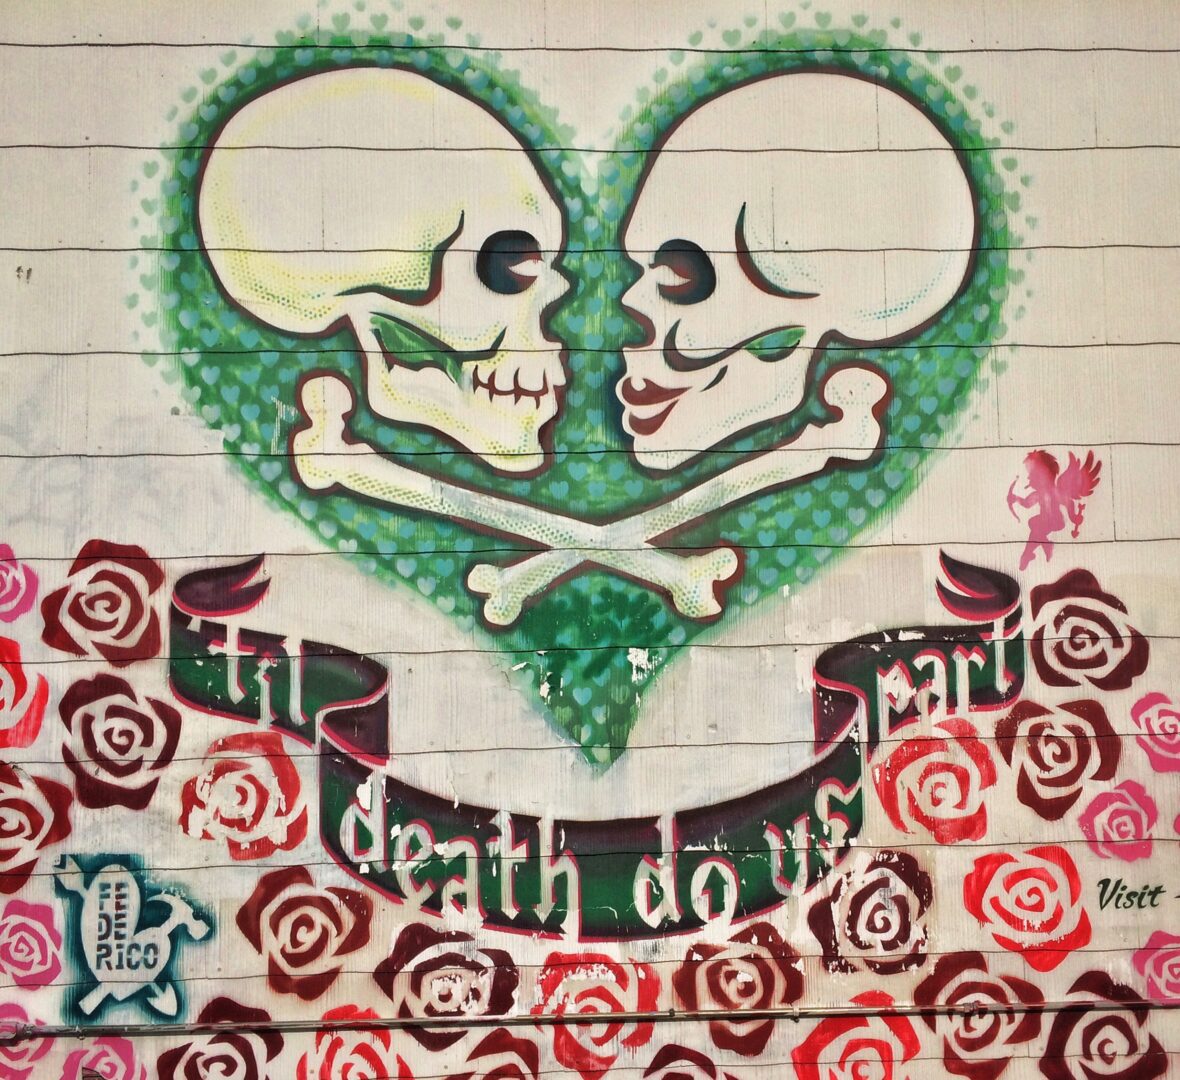 A wall with two skulls and roses painted on it.